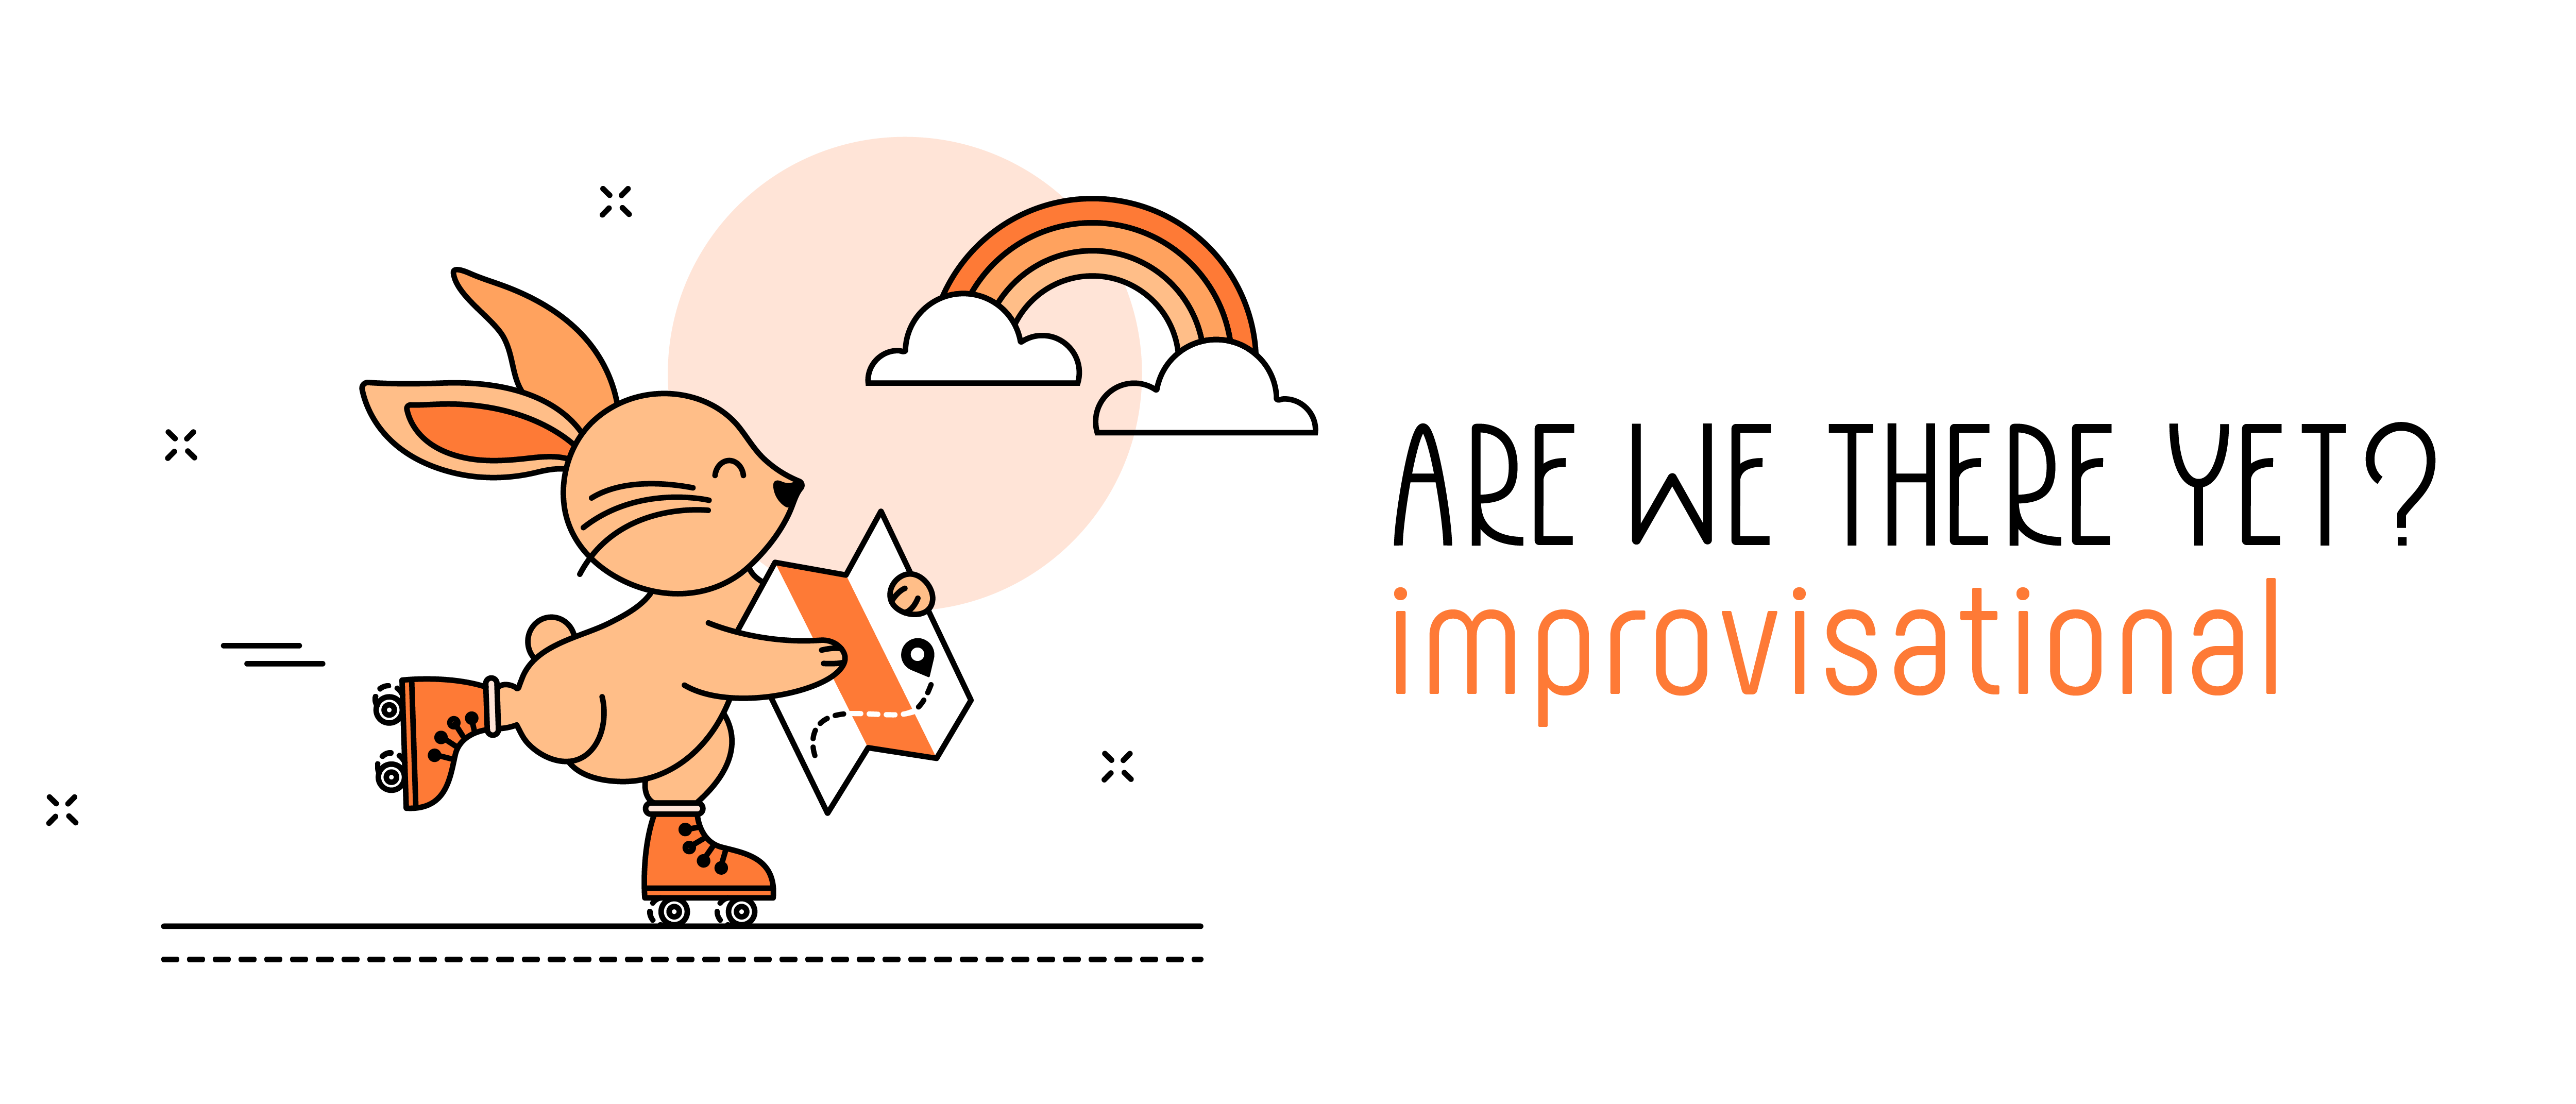 24-25 Improv - Are We There Yet? logo of a bunny on roller skates